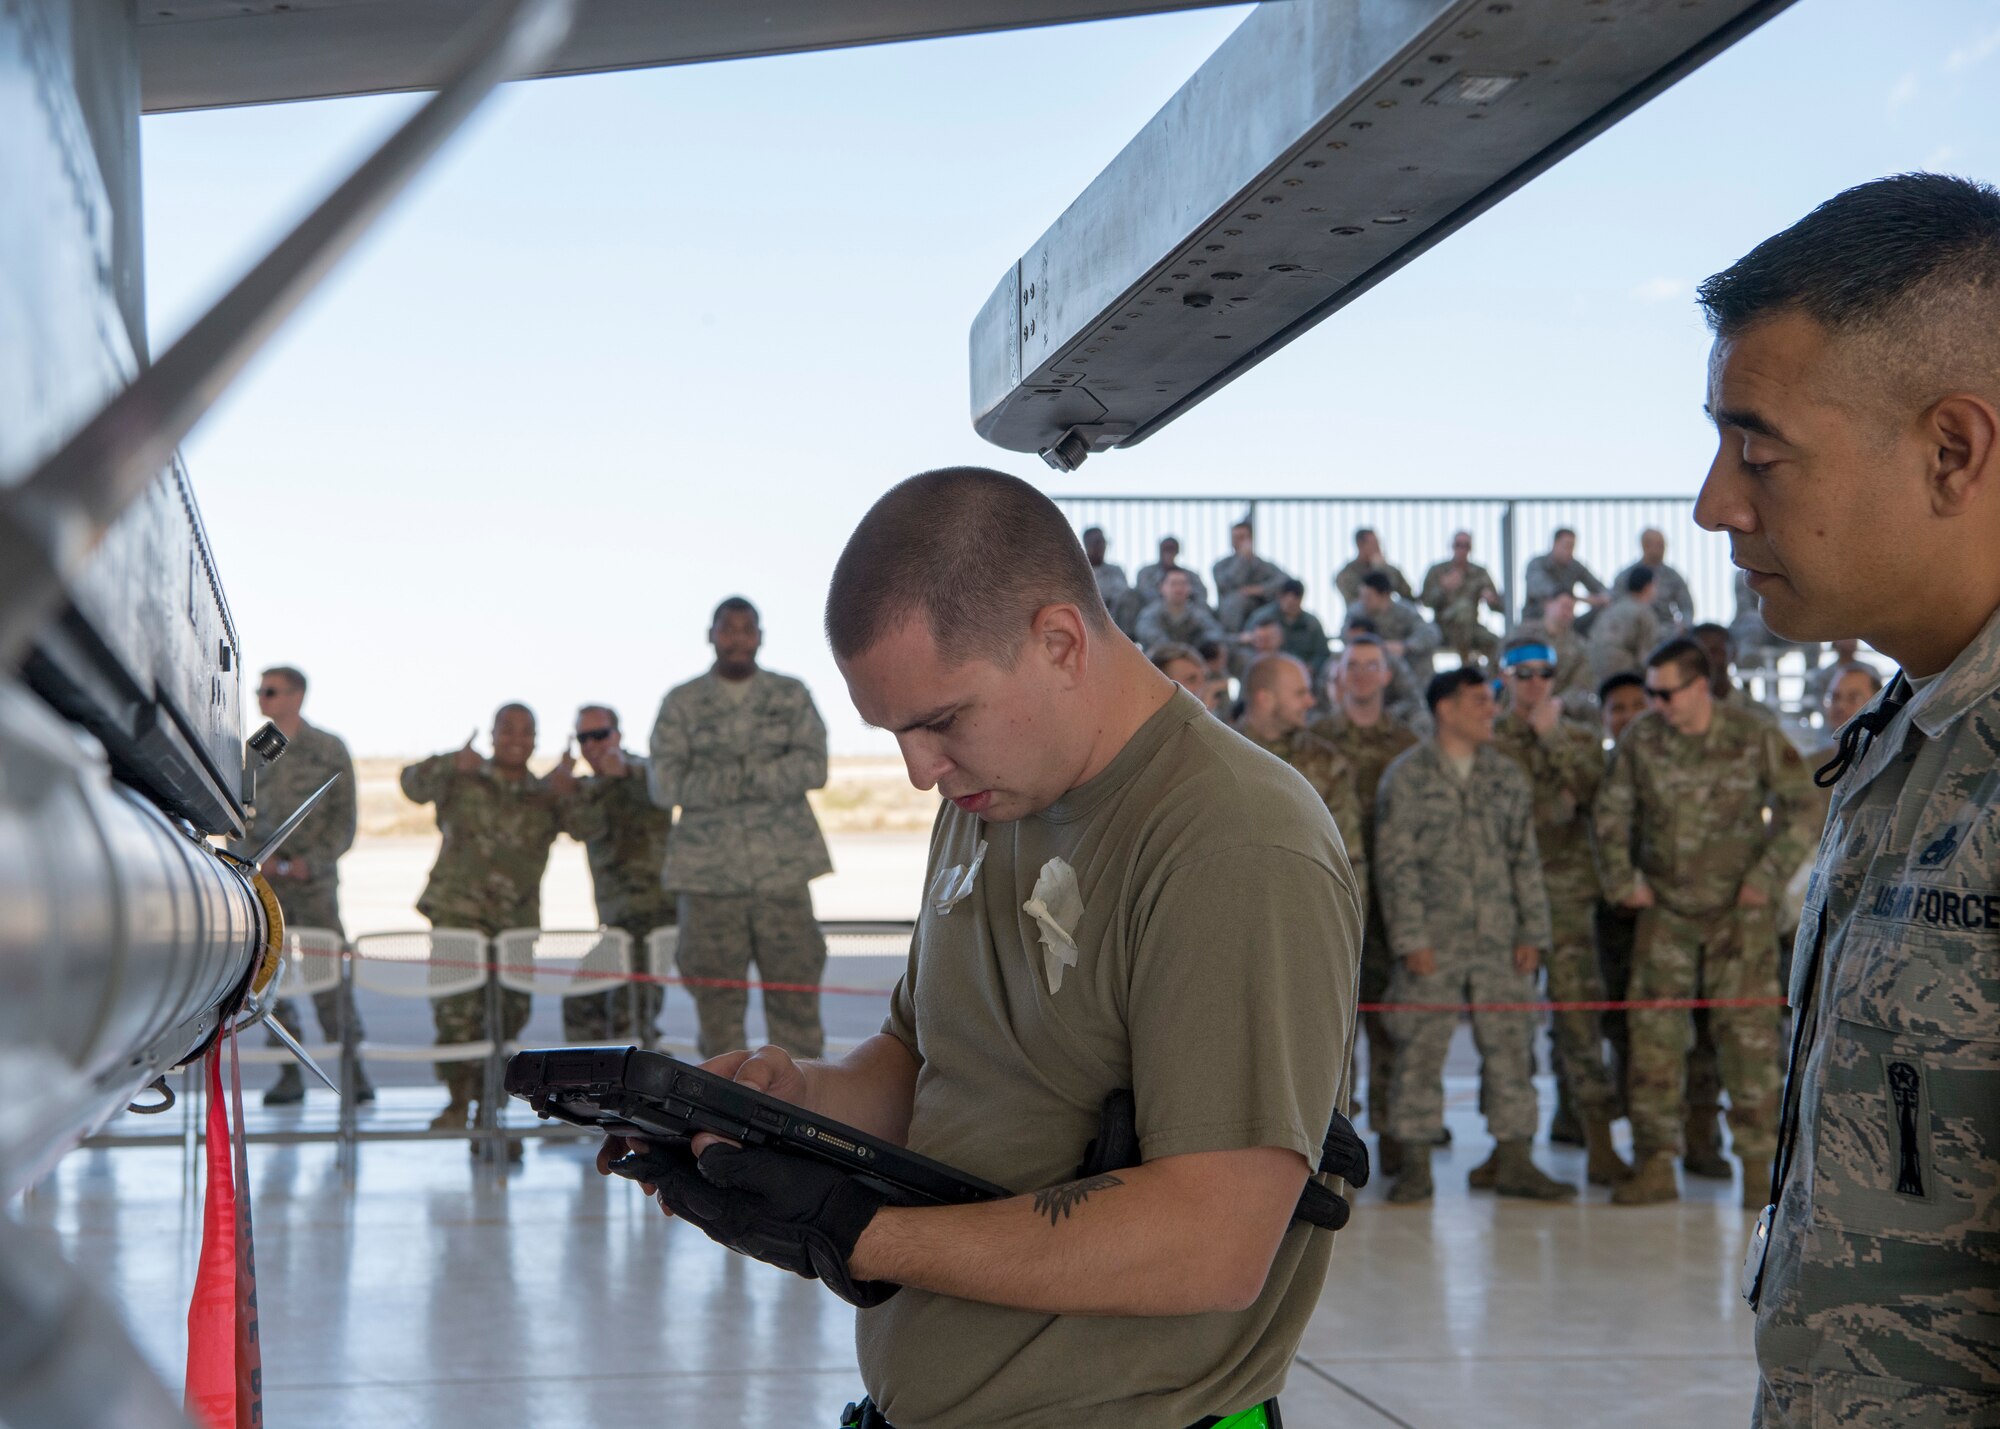 Staff Sgt. Edward Spidle, 311th Aircraft Maintenance Unit weapons load crew chief, ensures all equipment is accounted for during a load competition, Oct. 28, 2019, on Holloman Air Force Base, N.M. Two F-16 Vipers and two MQ-9 Reapers were used to test the loading skills of 12 Airmen during the 2019 third quarter load competition. (U.S. Air Force photo by Airman 1st Class Autumn Vogt)